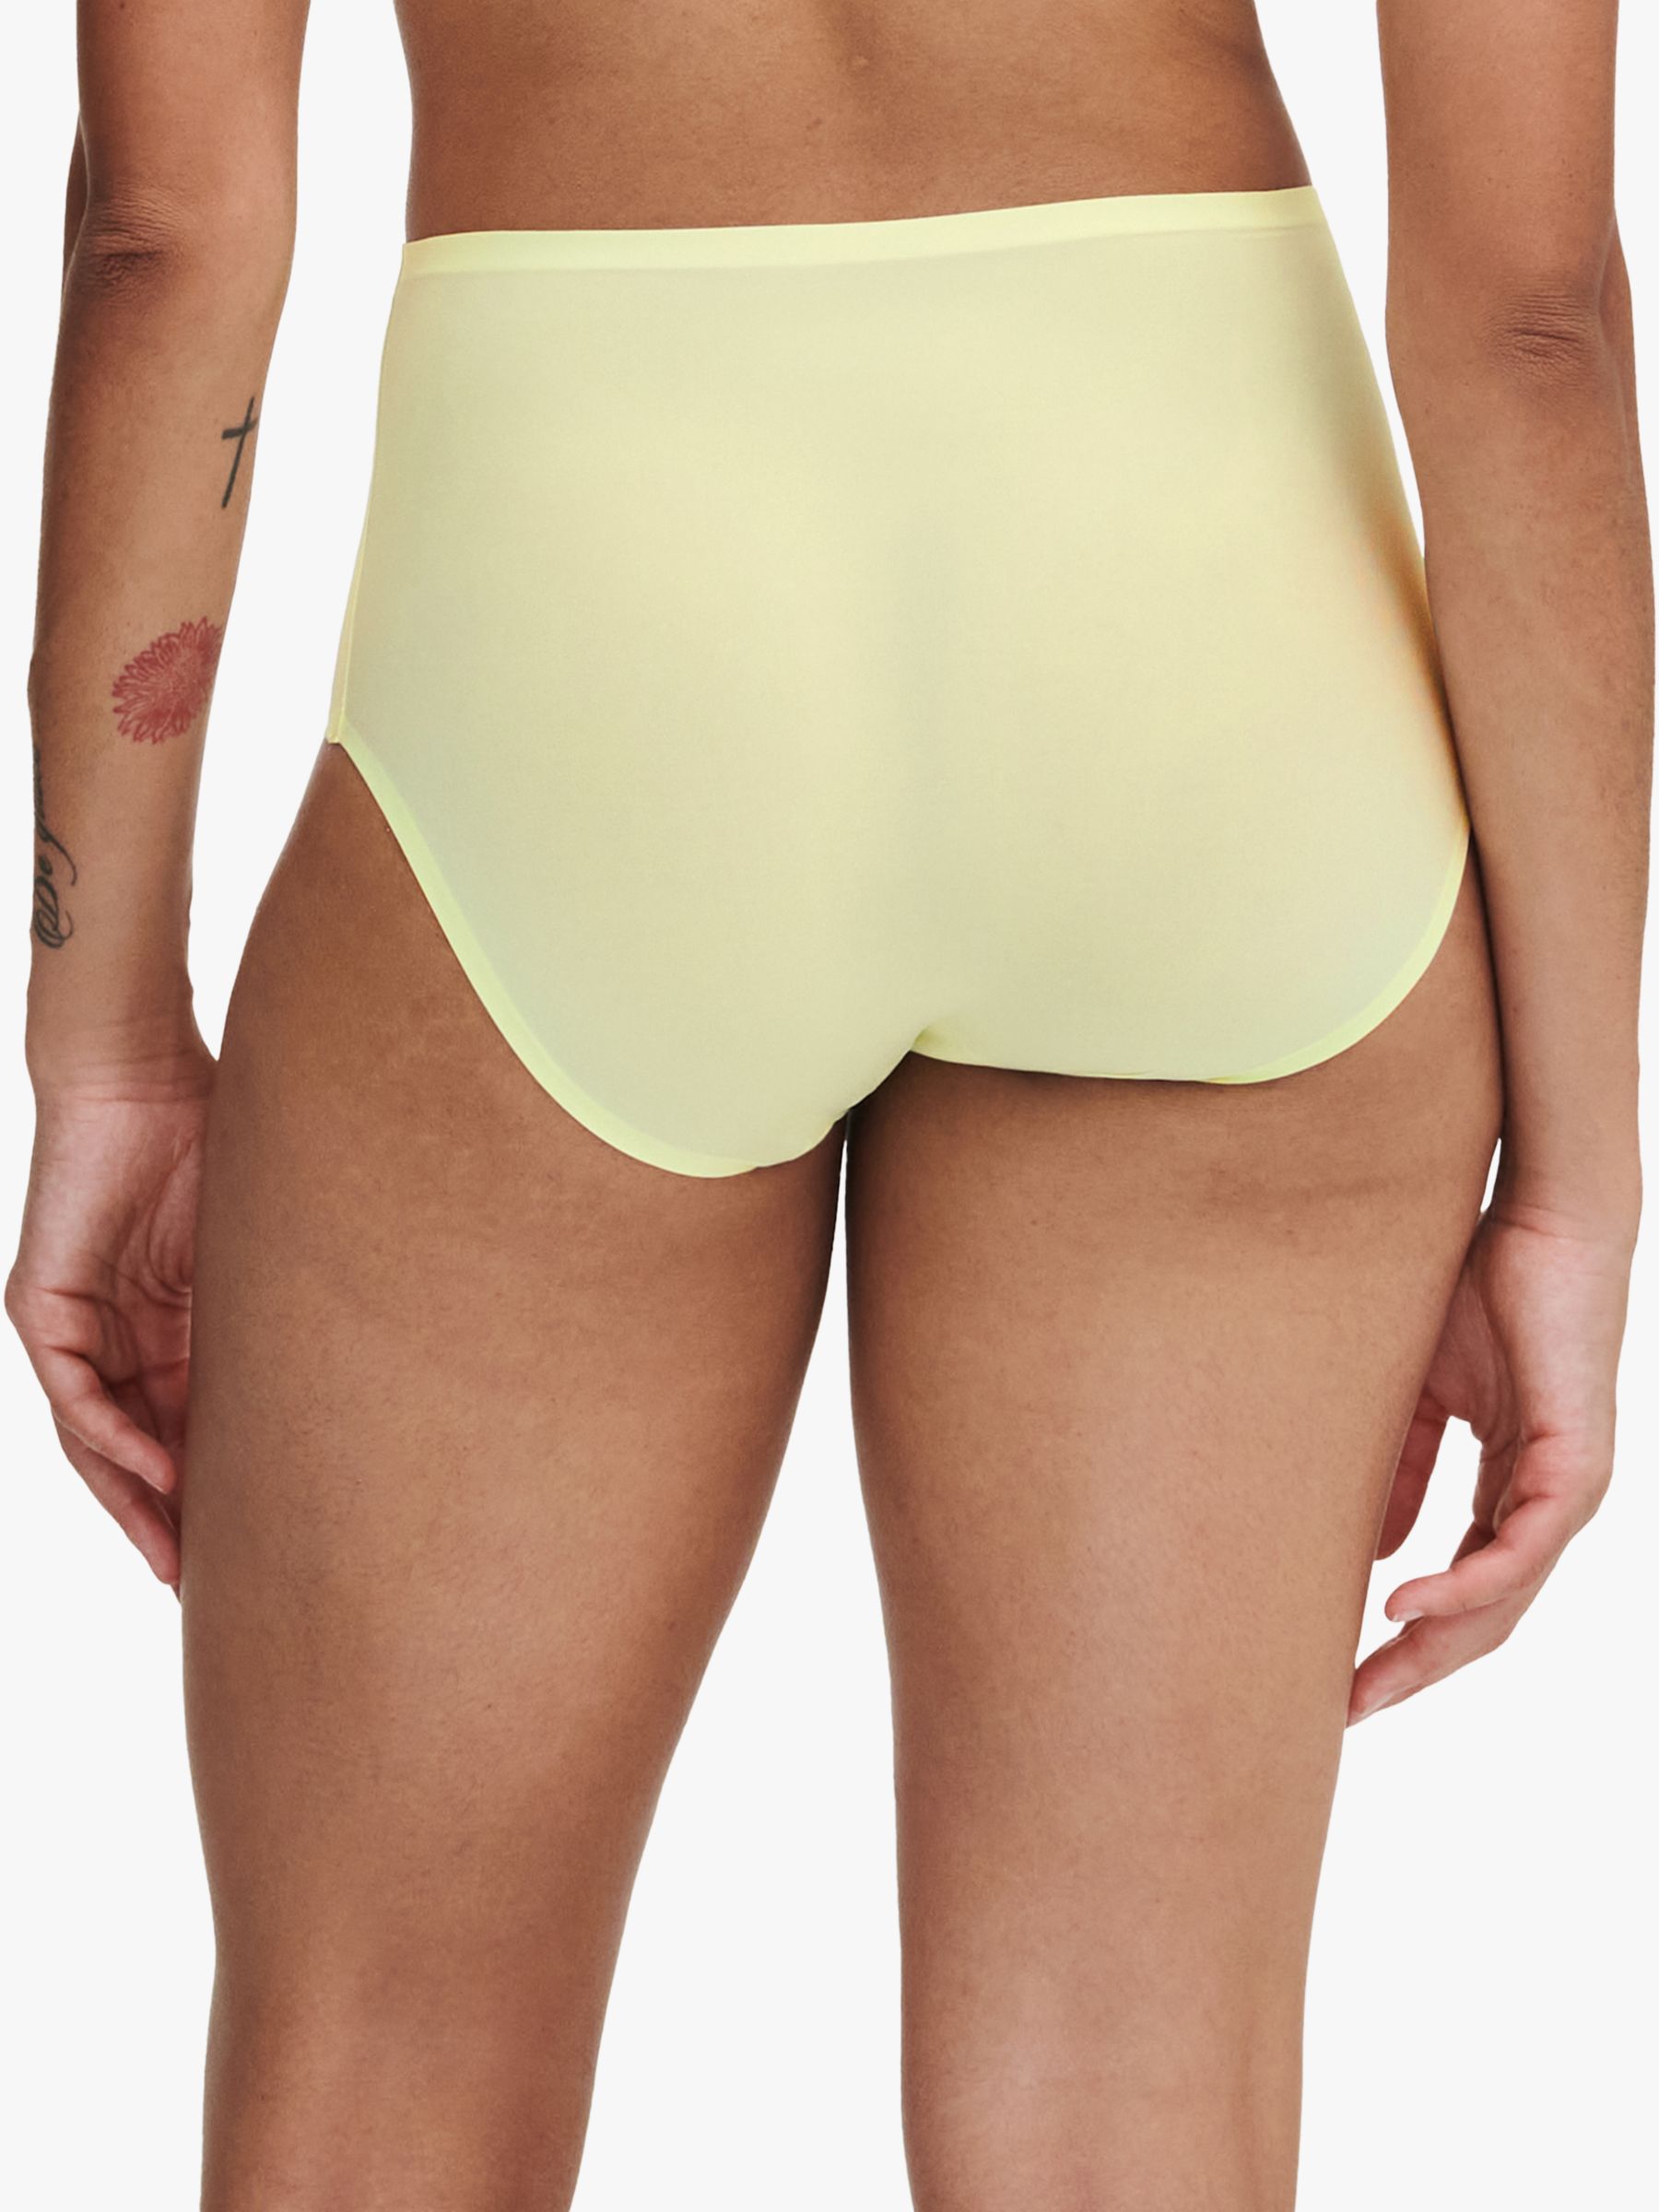 Chantelle Soft Stretch High Waisted Knickers, Tender Yellow, One Size